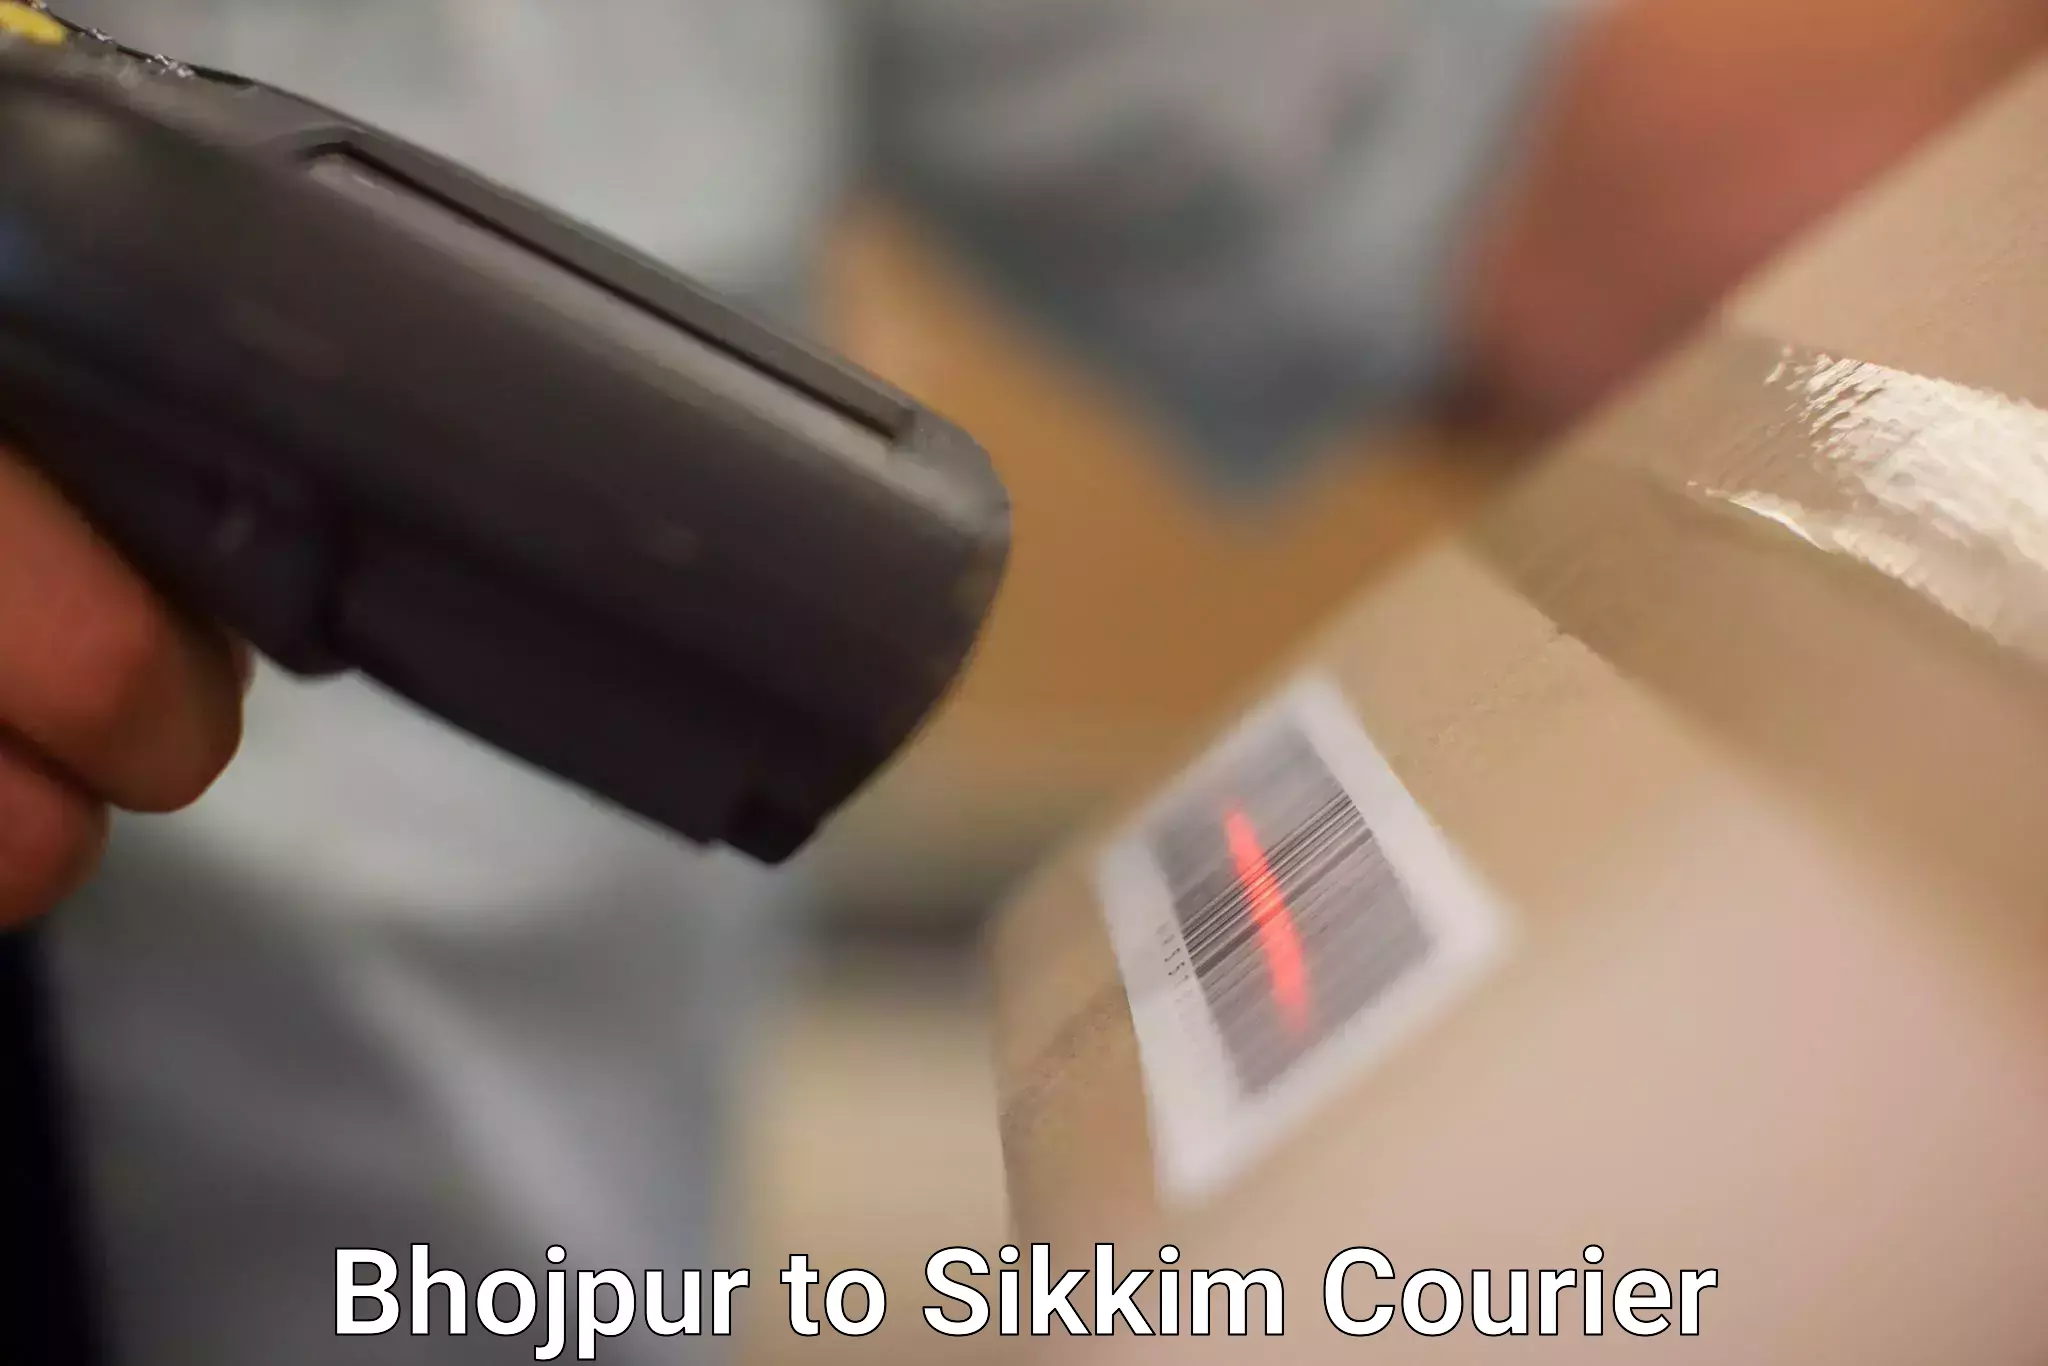 Specialized shipment handling in Bhojpur to Sikkim